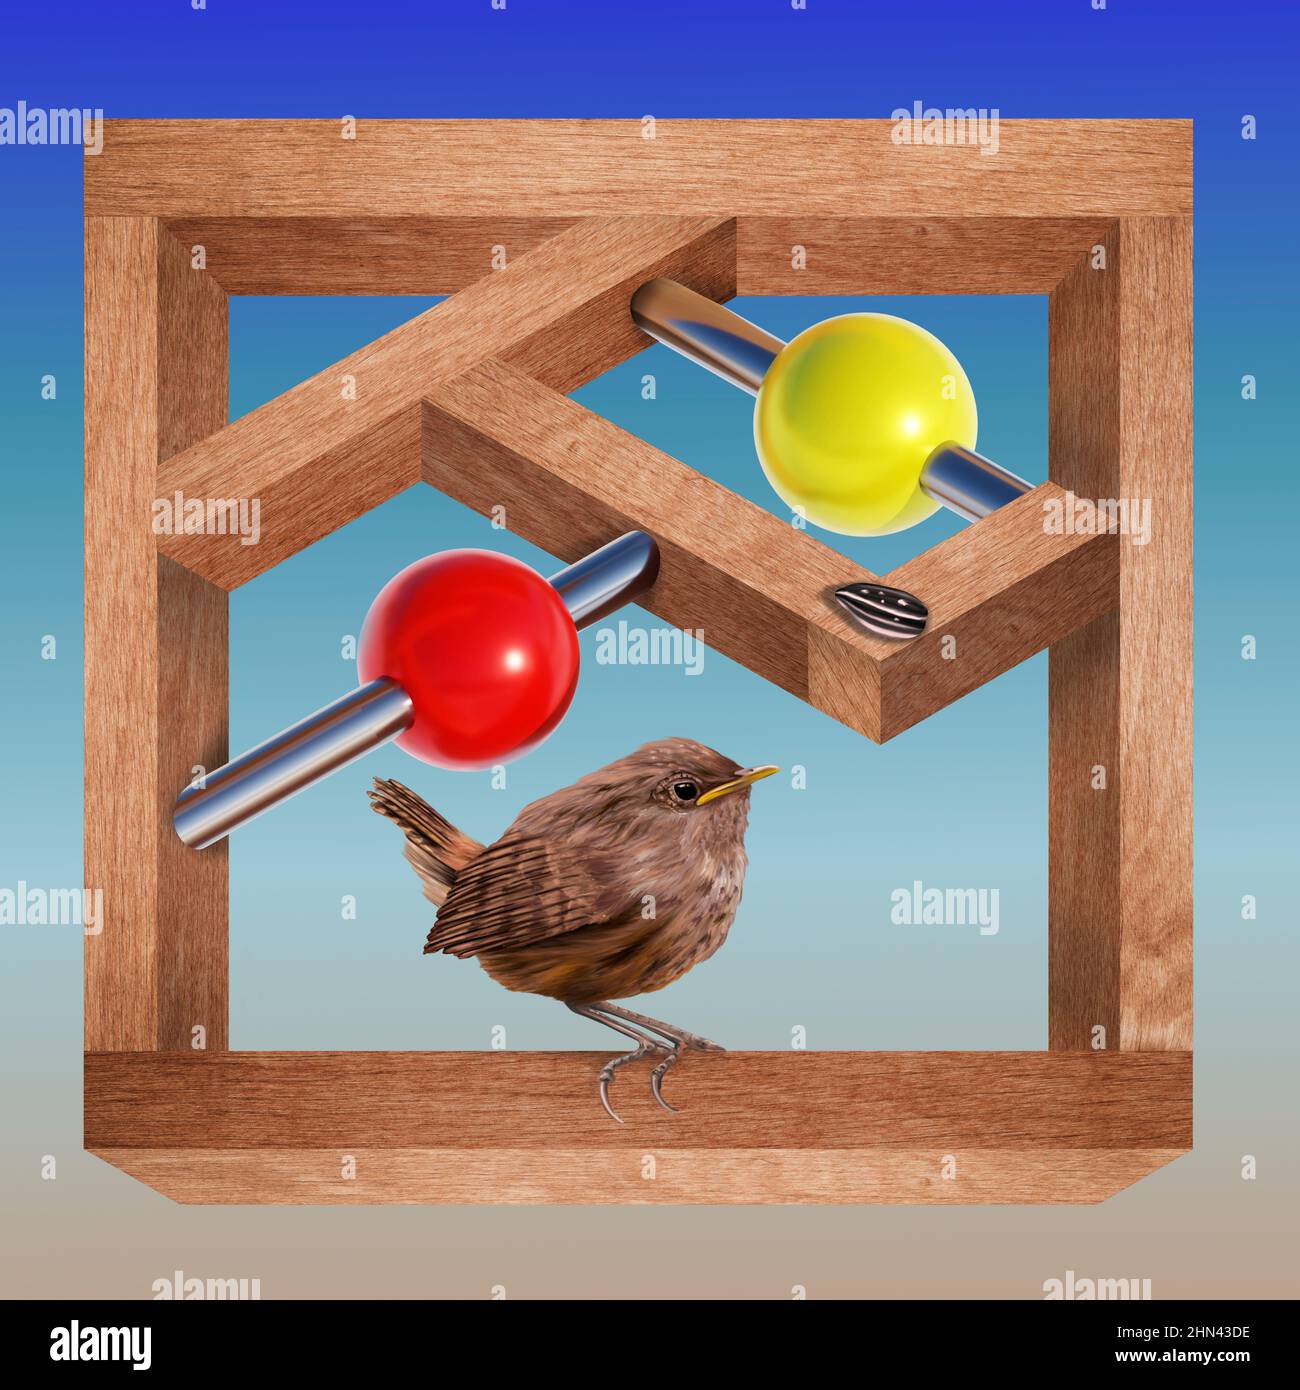 3d illustration of a small bird perched on an impossible wooden structure Stock Photo